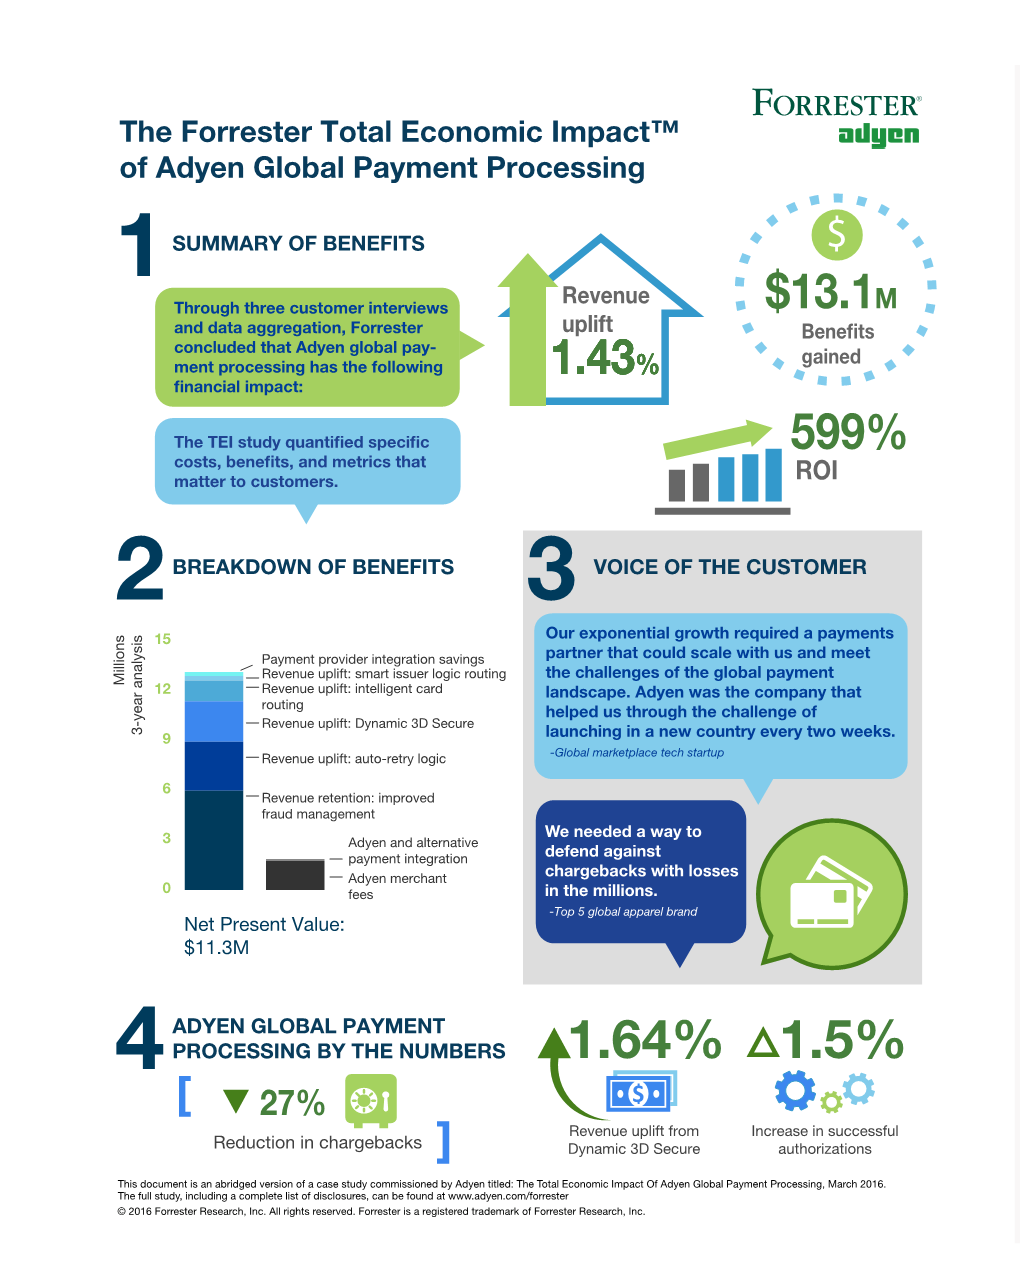 1.64% 1.5% 27% Revenue Uplift from Increase in Successful Reduction in Chargebacks Dynamic 3D Secure Authorizations